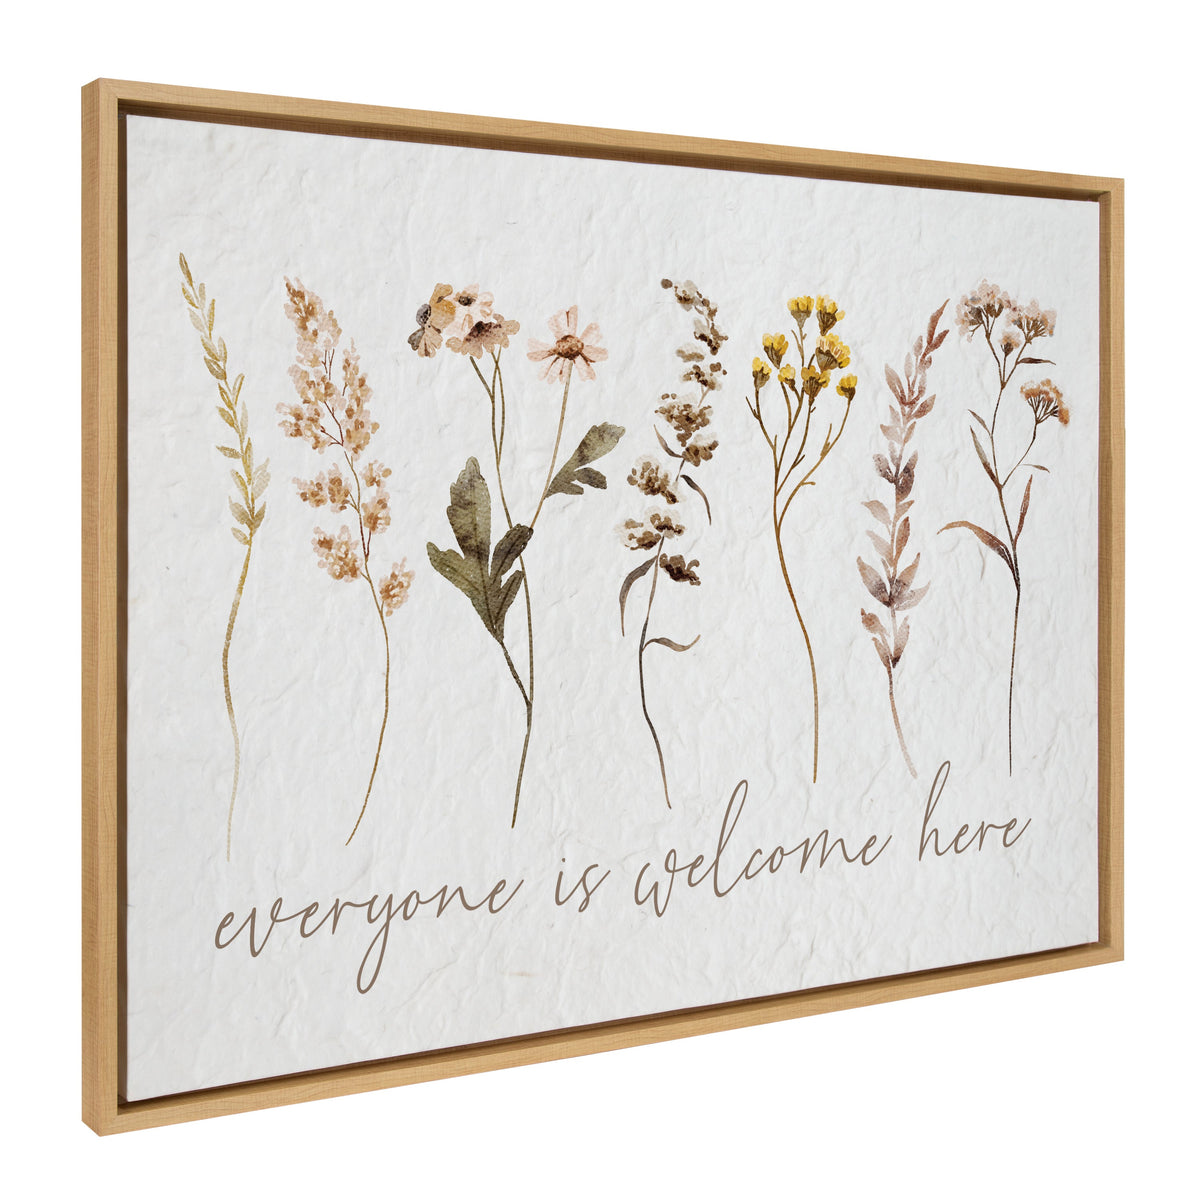 Everyone is welcome here / 38x28 Framed Canvas